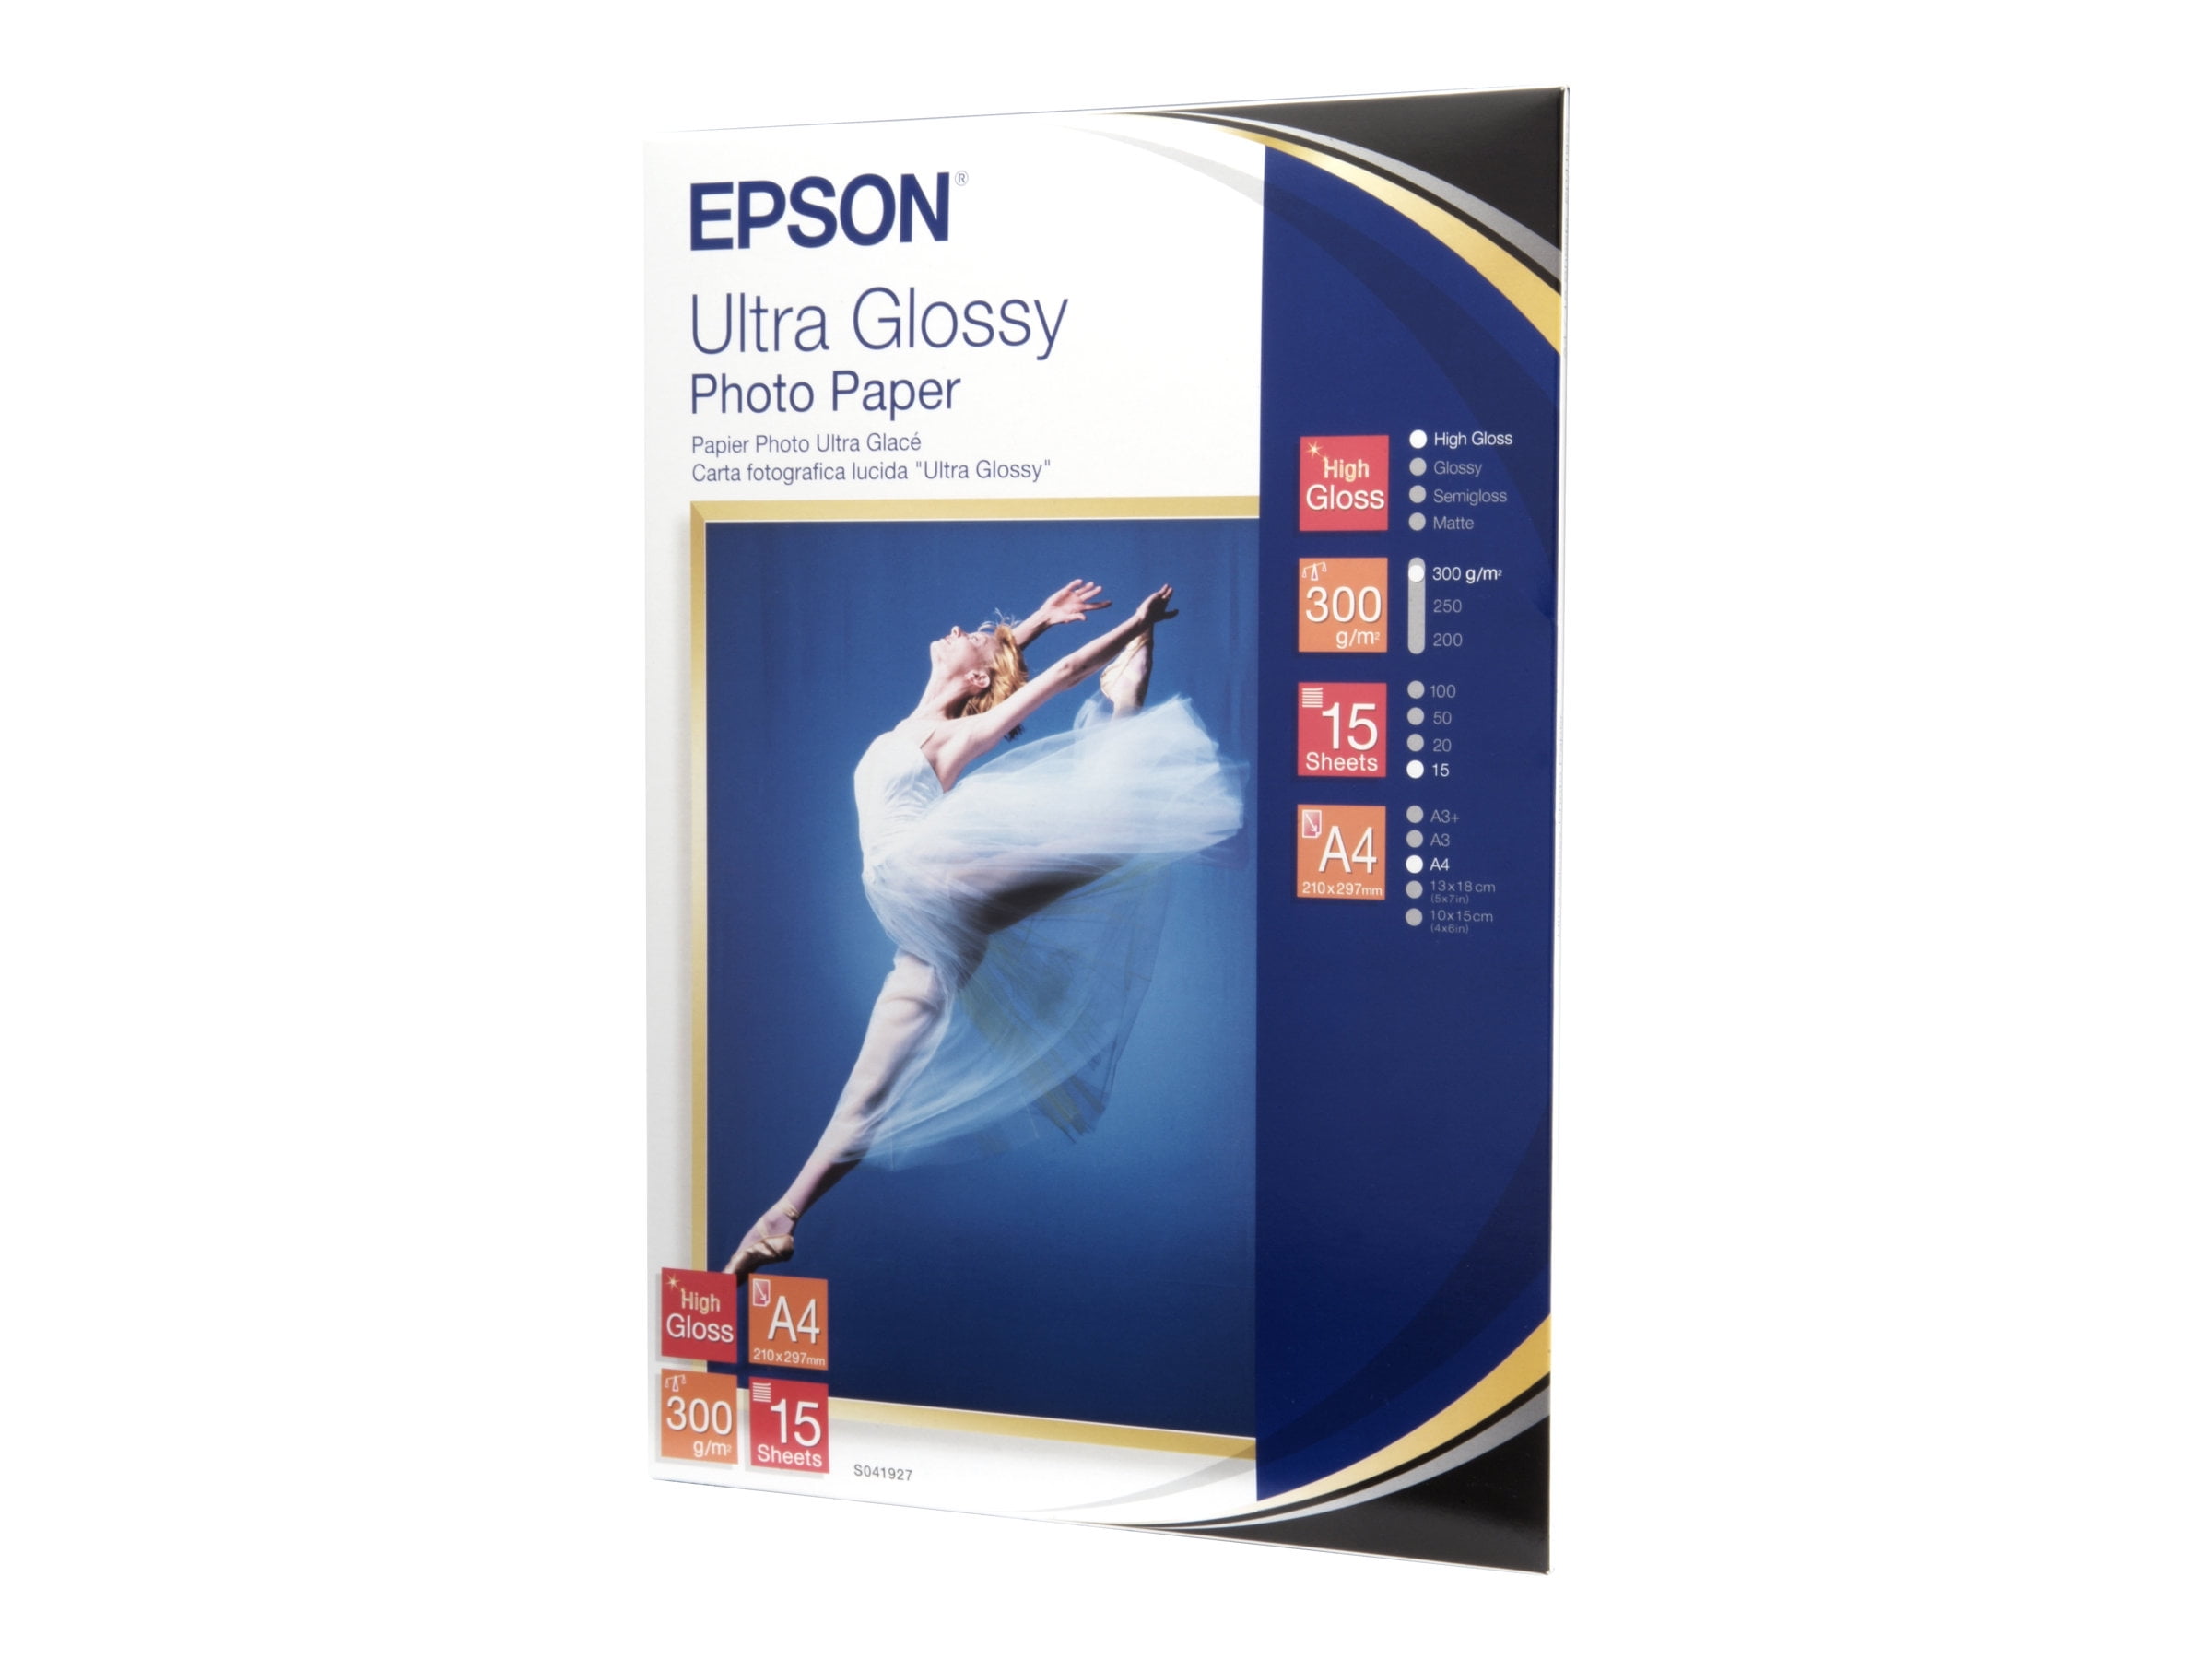 Ultra Glossy Photo Paper - Glossy - (8.25 in x 11.7 in) 15 sheet(s) photo paper - for EcoTank ET-2710, 2712, 2714, 2715, 2720, 2726, 2750, 2751, 2756, 4700, 4750 - Walmart.com - Walmart.com